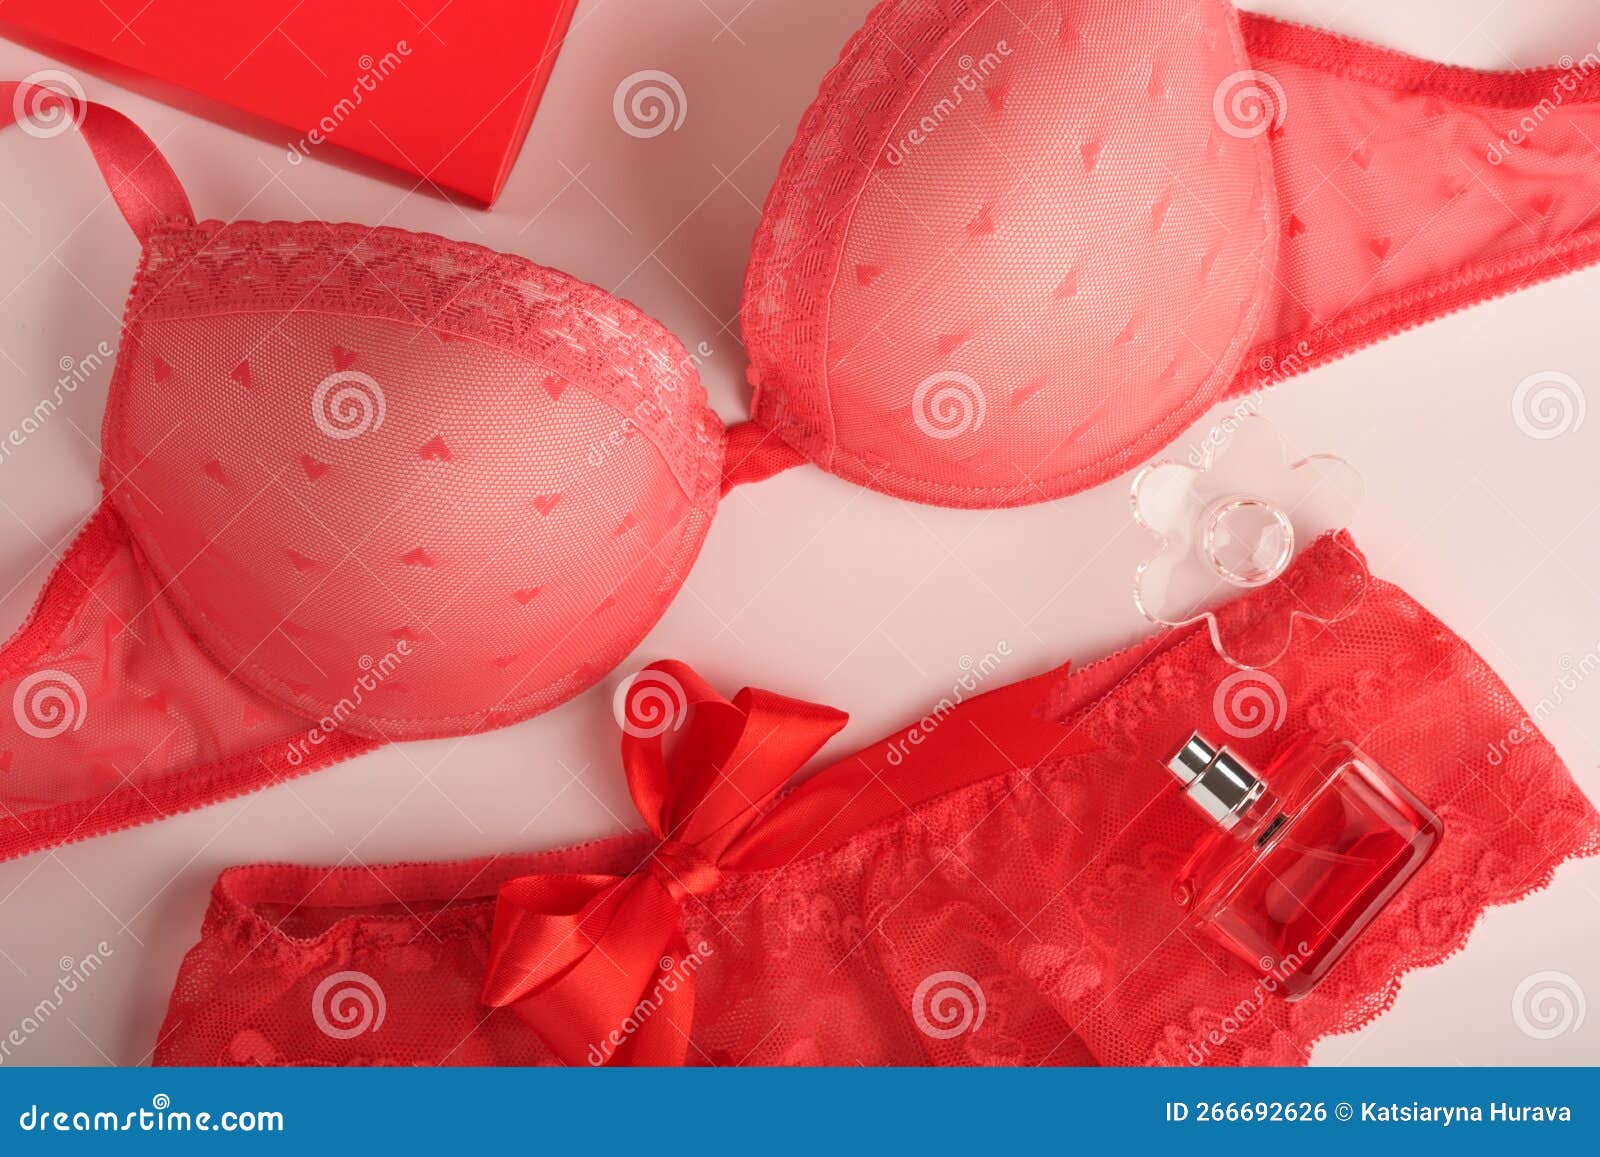 https://thumbs.dreamstime.com/z/red-sexy-bra-panties-pink-background-women-underwear-set-roses-perfume-gift-idea-womens-day-valentines-copy-266692626.jpg